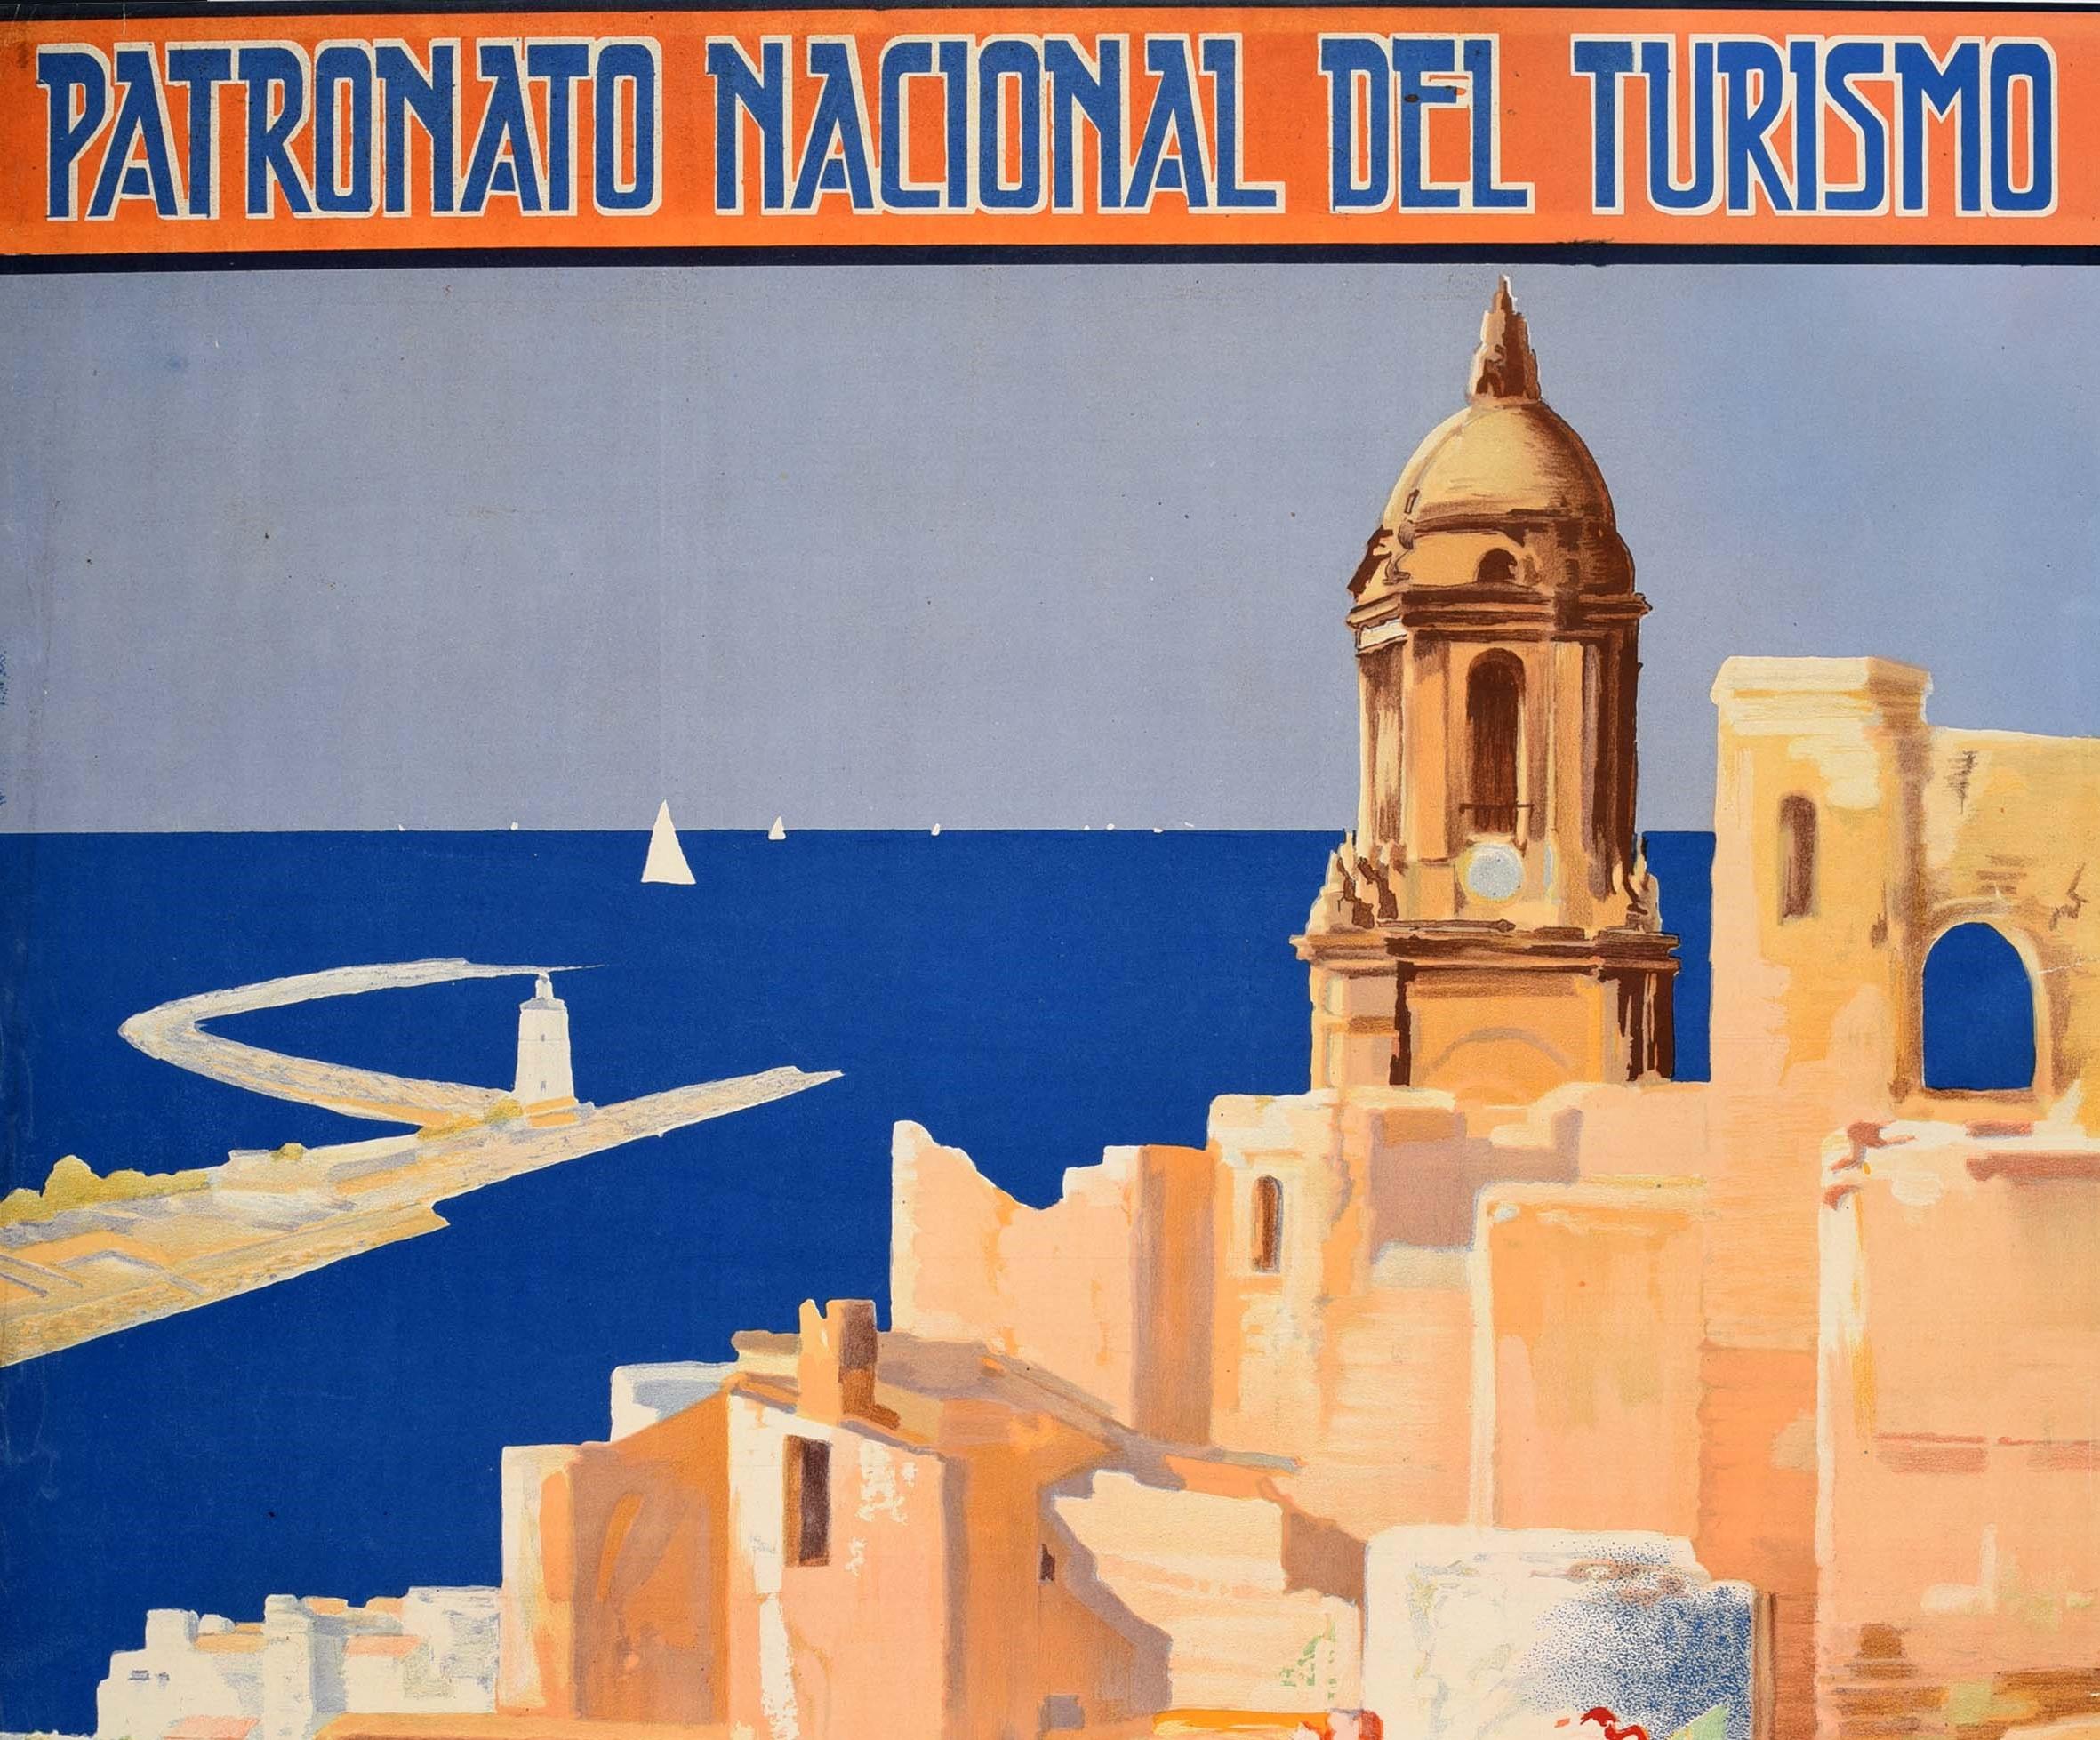 Original vintage travel poster for Malaga Clima Delicioso en Todo Tiempo / Delicious Weather at All Times issued by the PNT Patronato Nacional Del Turismo / National Tourism Board featuring colorful artwork of old city buildings and the historic